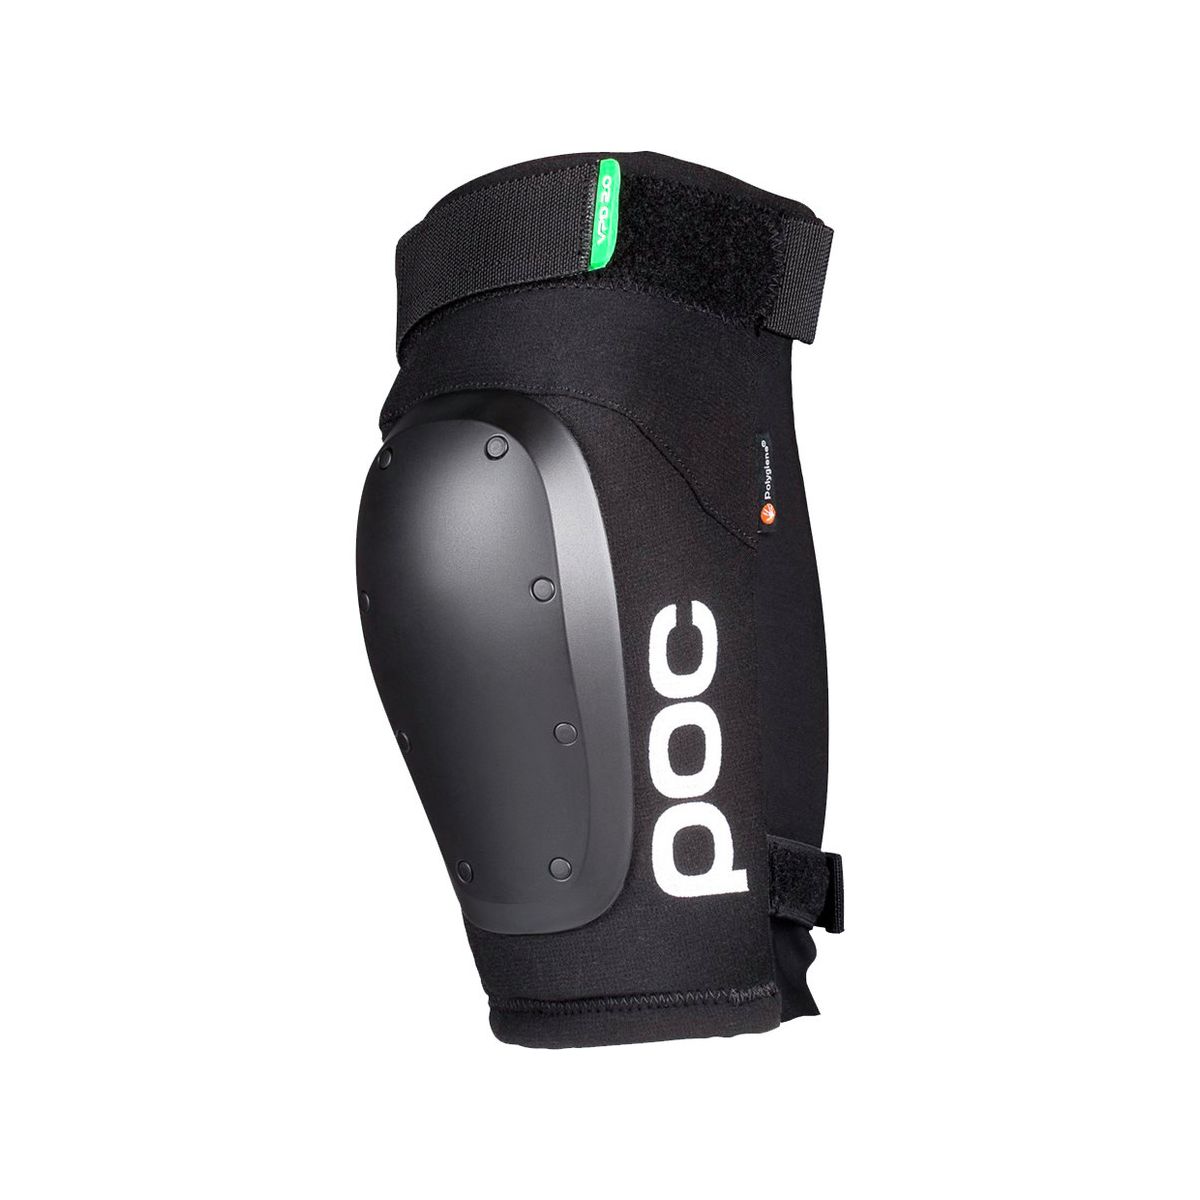 POC Joint VPD 20 DH Knee Guards